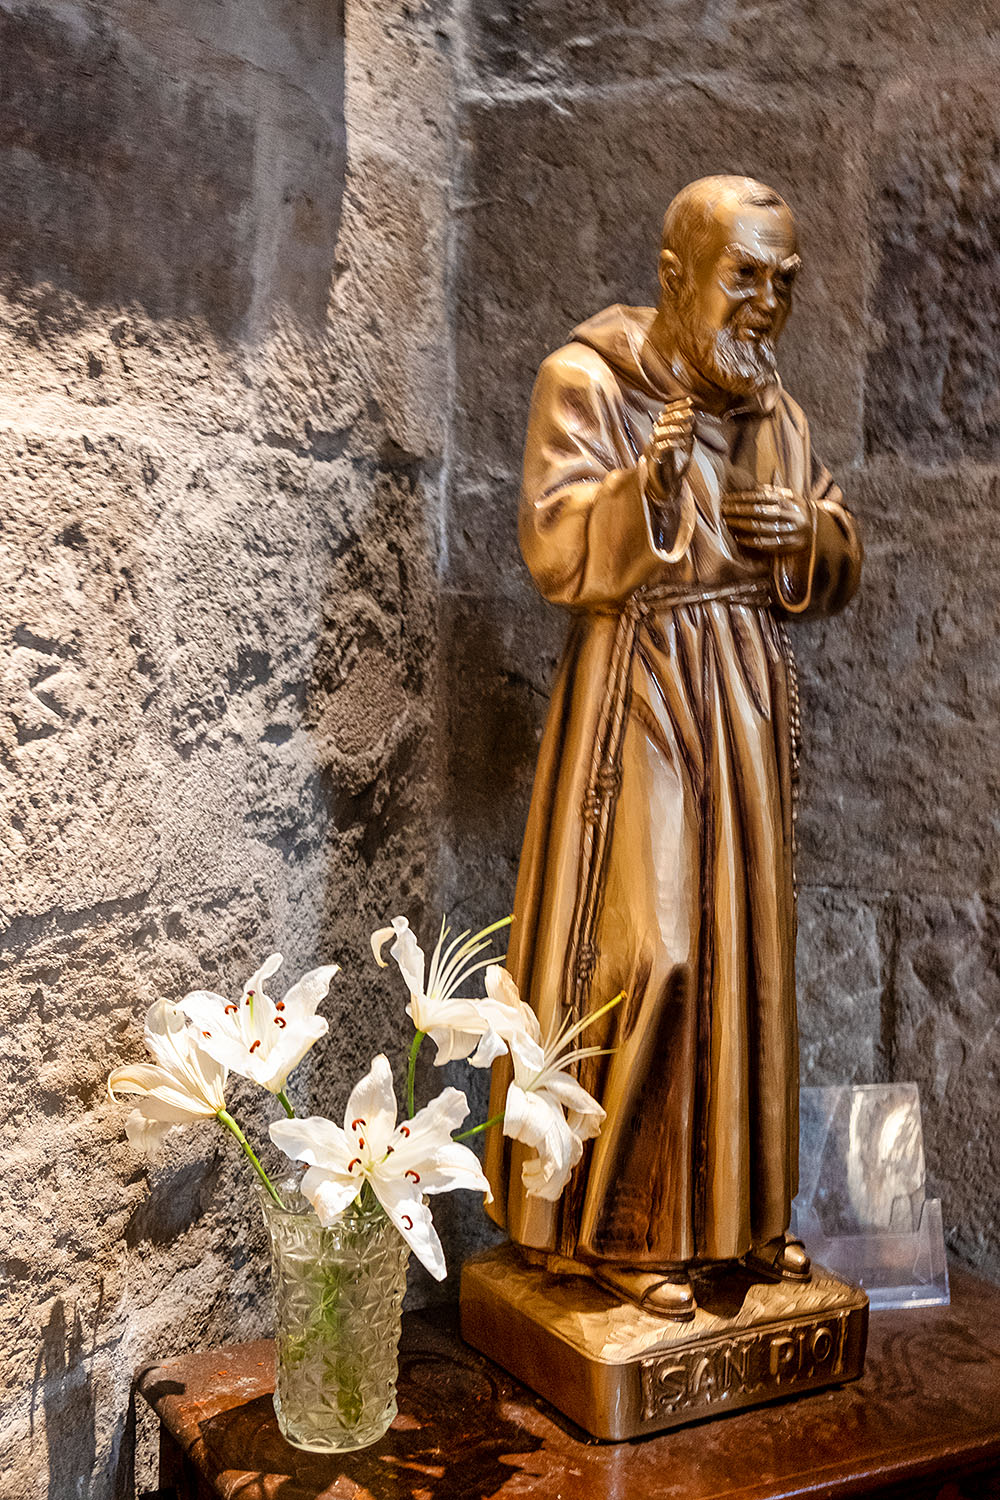 Statue of Padre Pio in the 'Saint-Étienne' church (5 on the map)